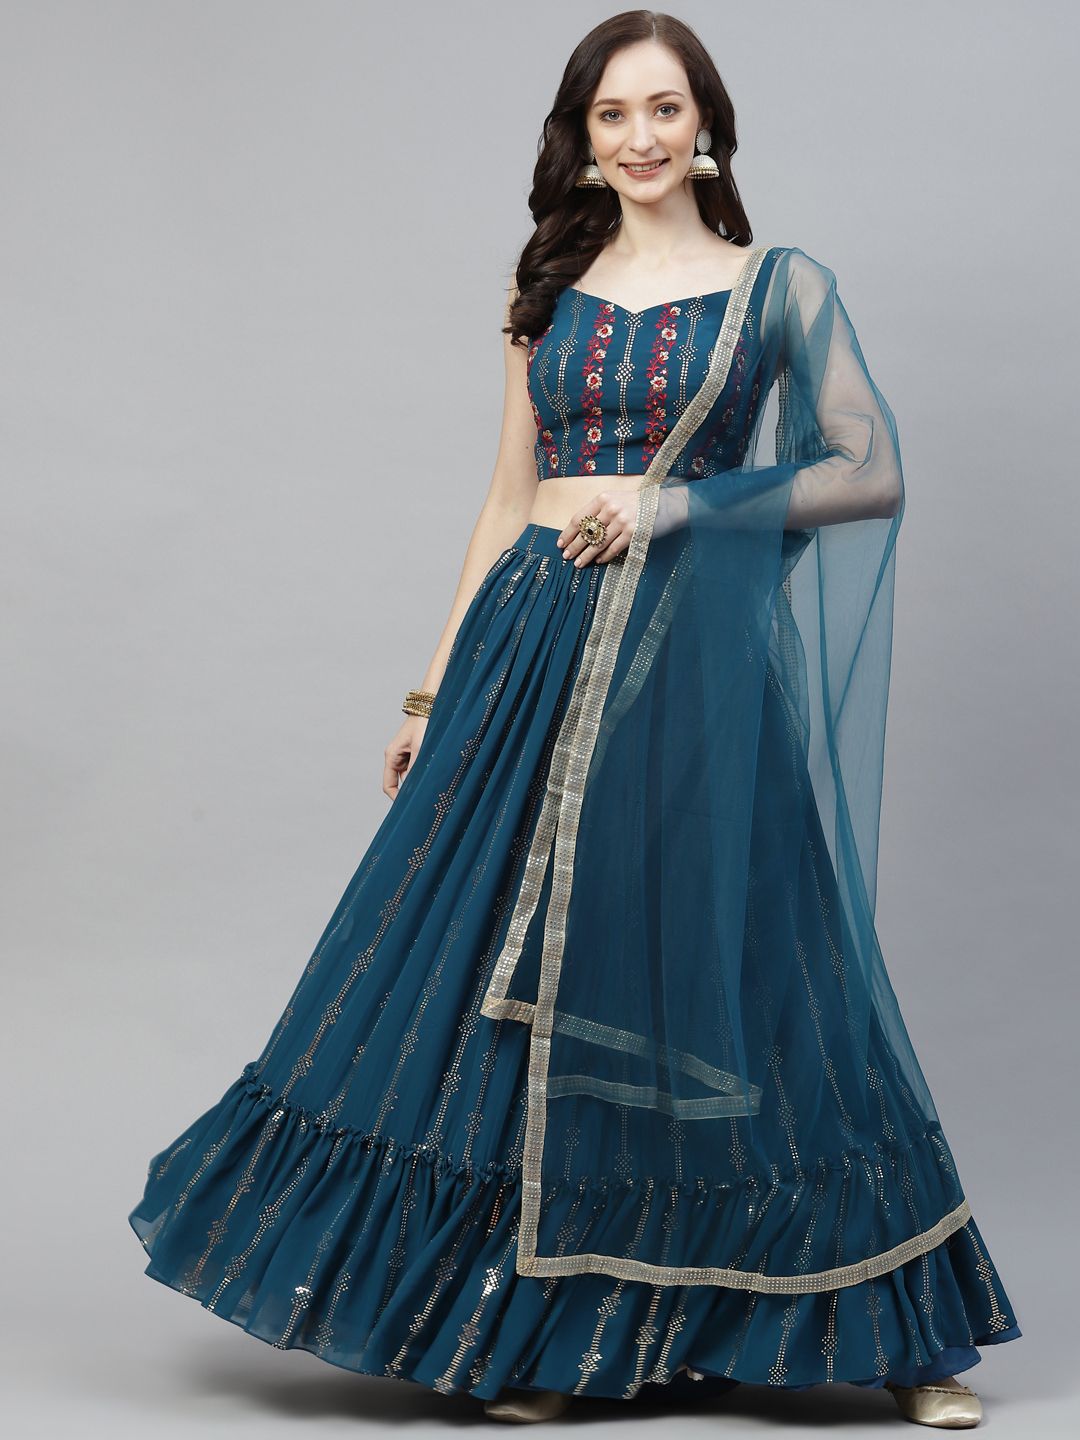 Readiprint Fashions Teal & Gold-Toned Embroidered Unstitched Lehenga & Blouse With Dupatta Price in India